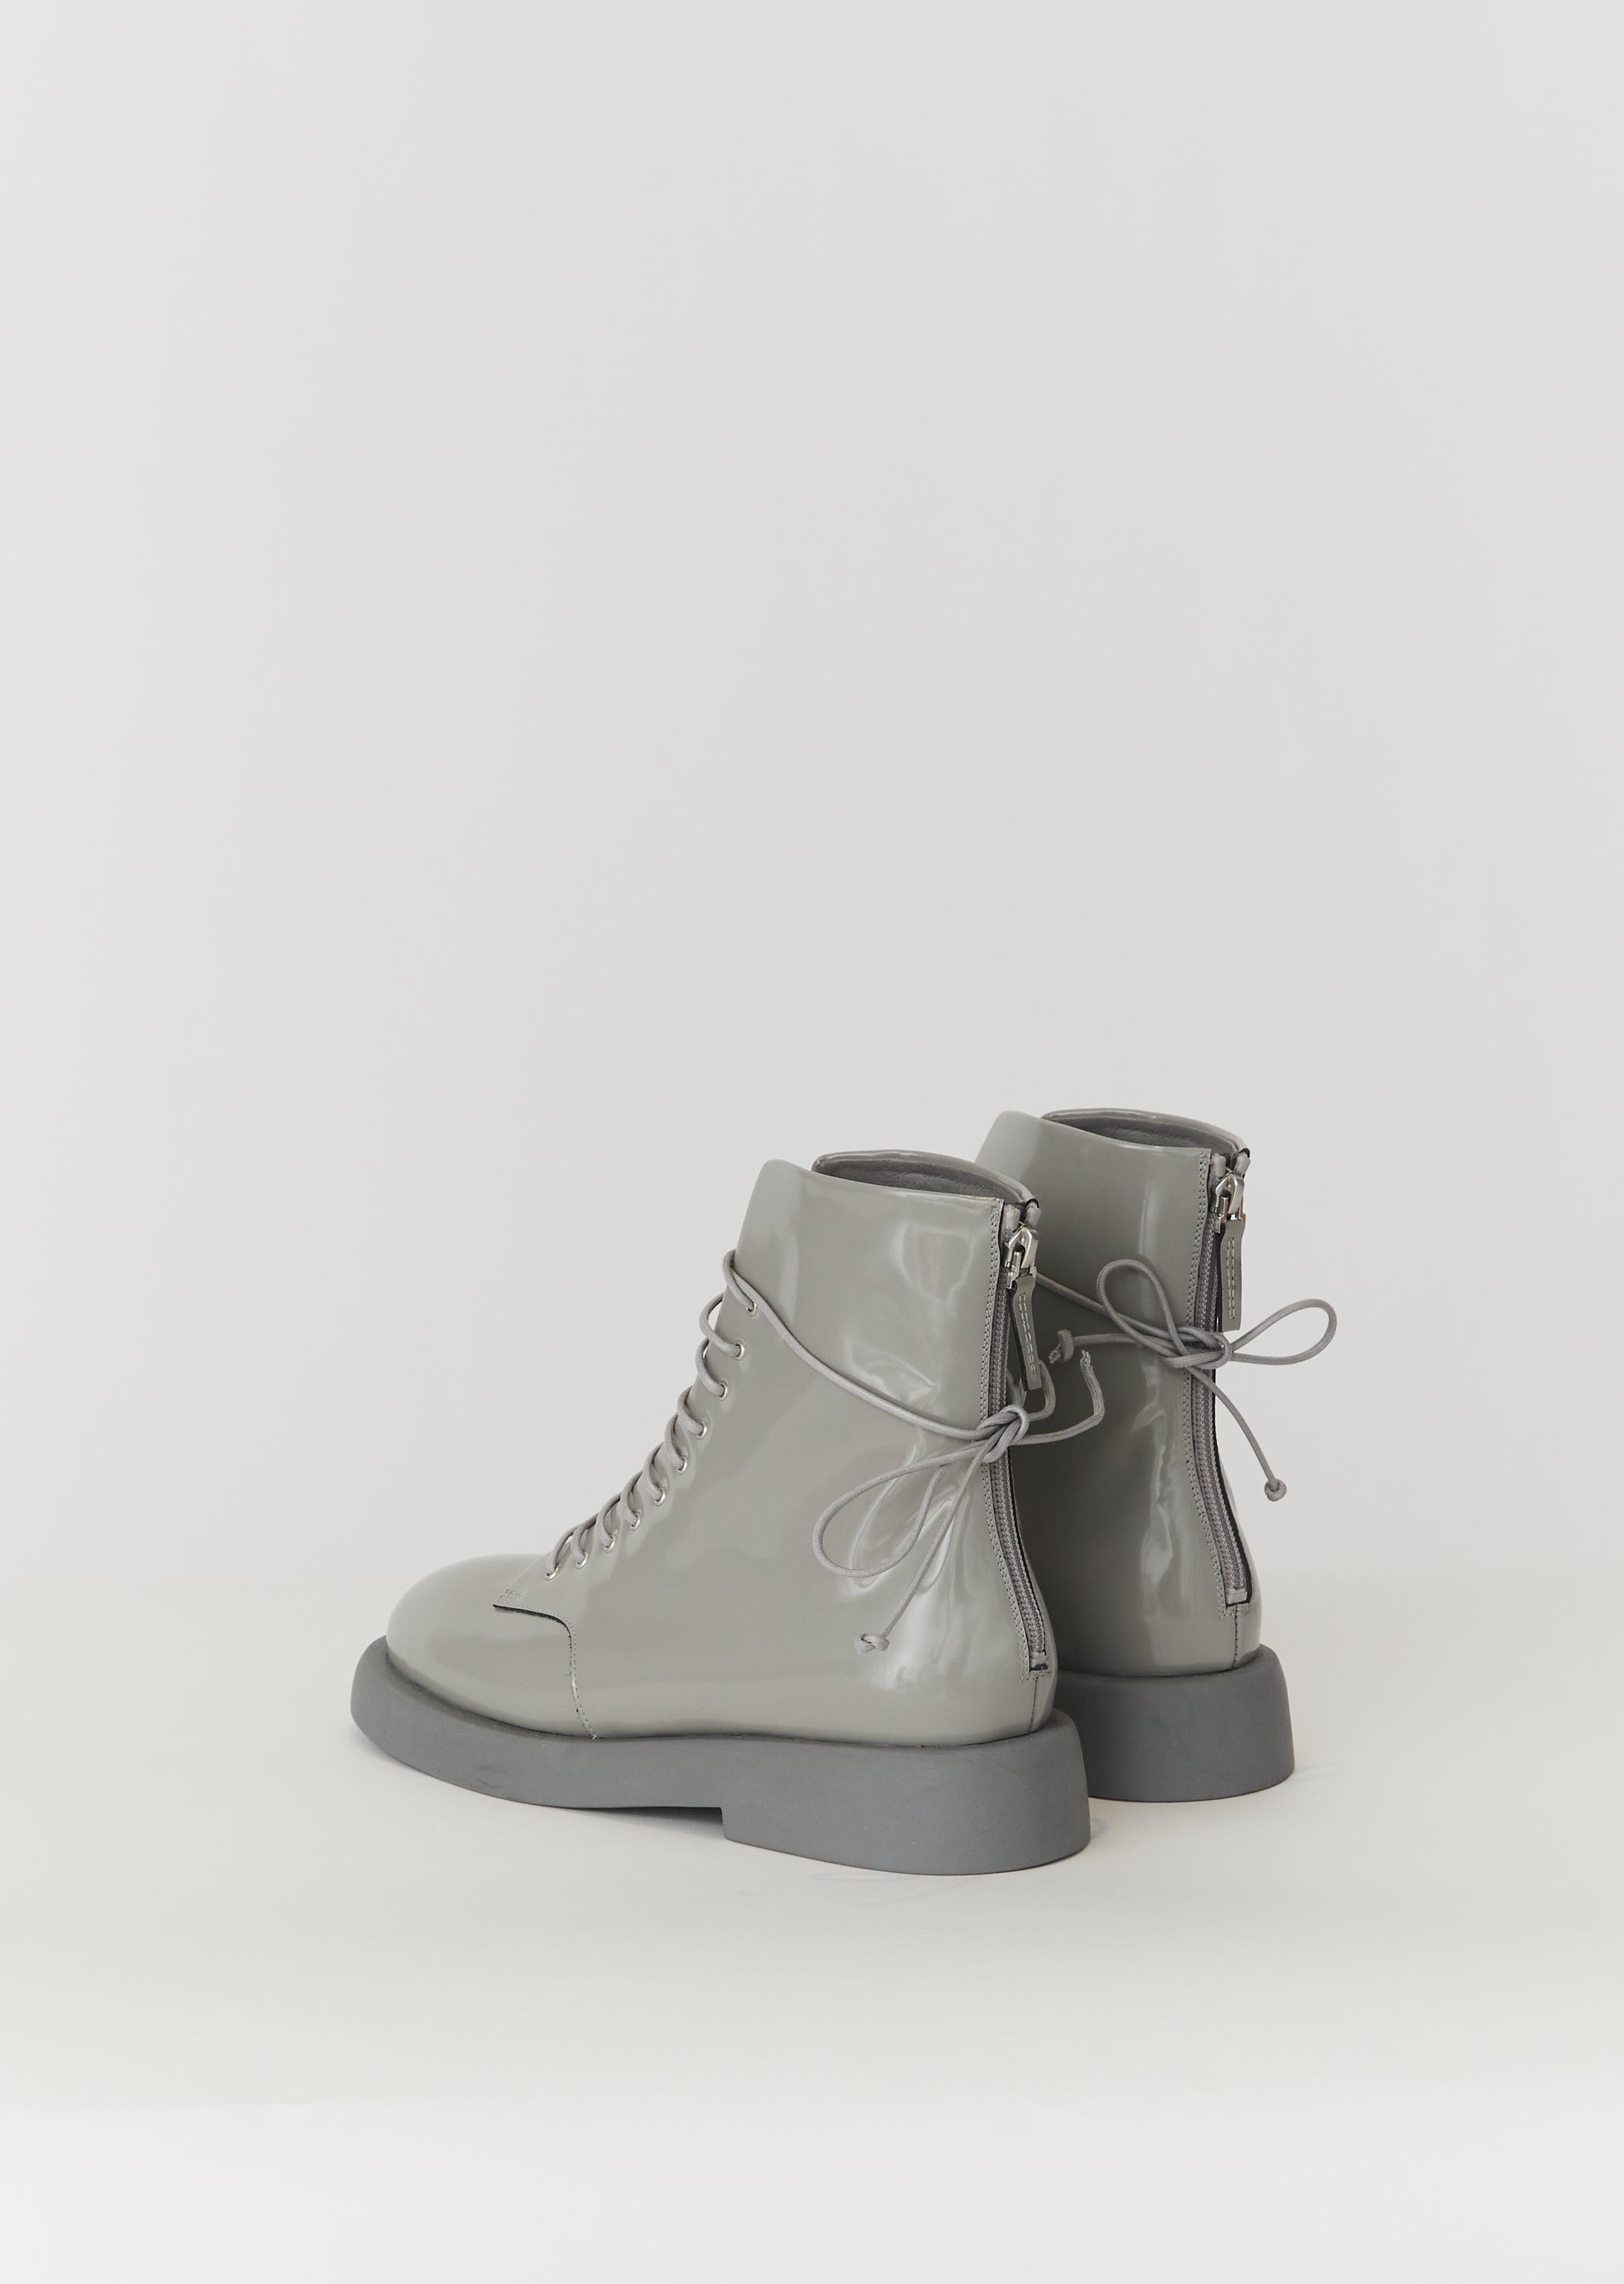 grey patent leather boots